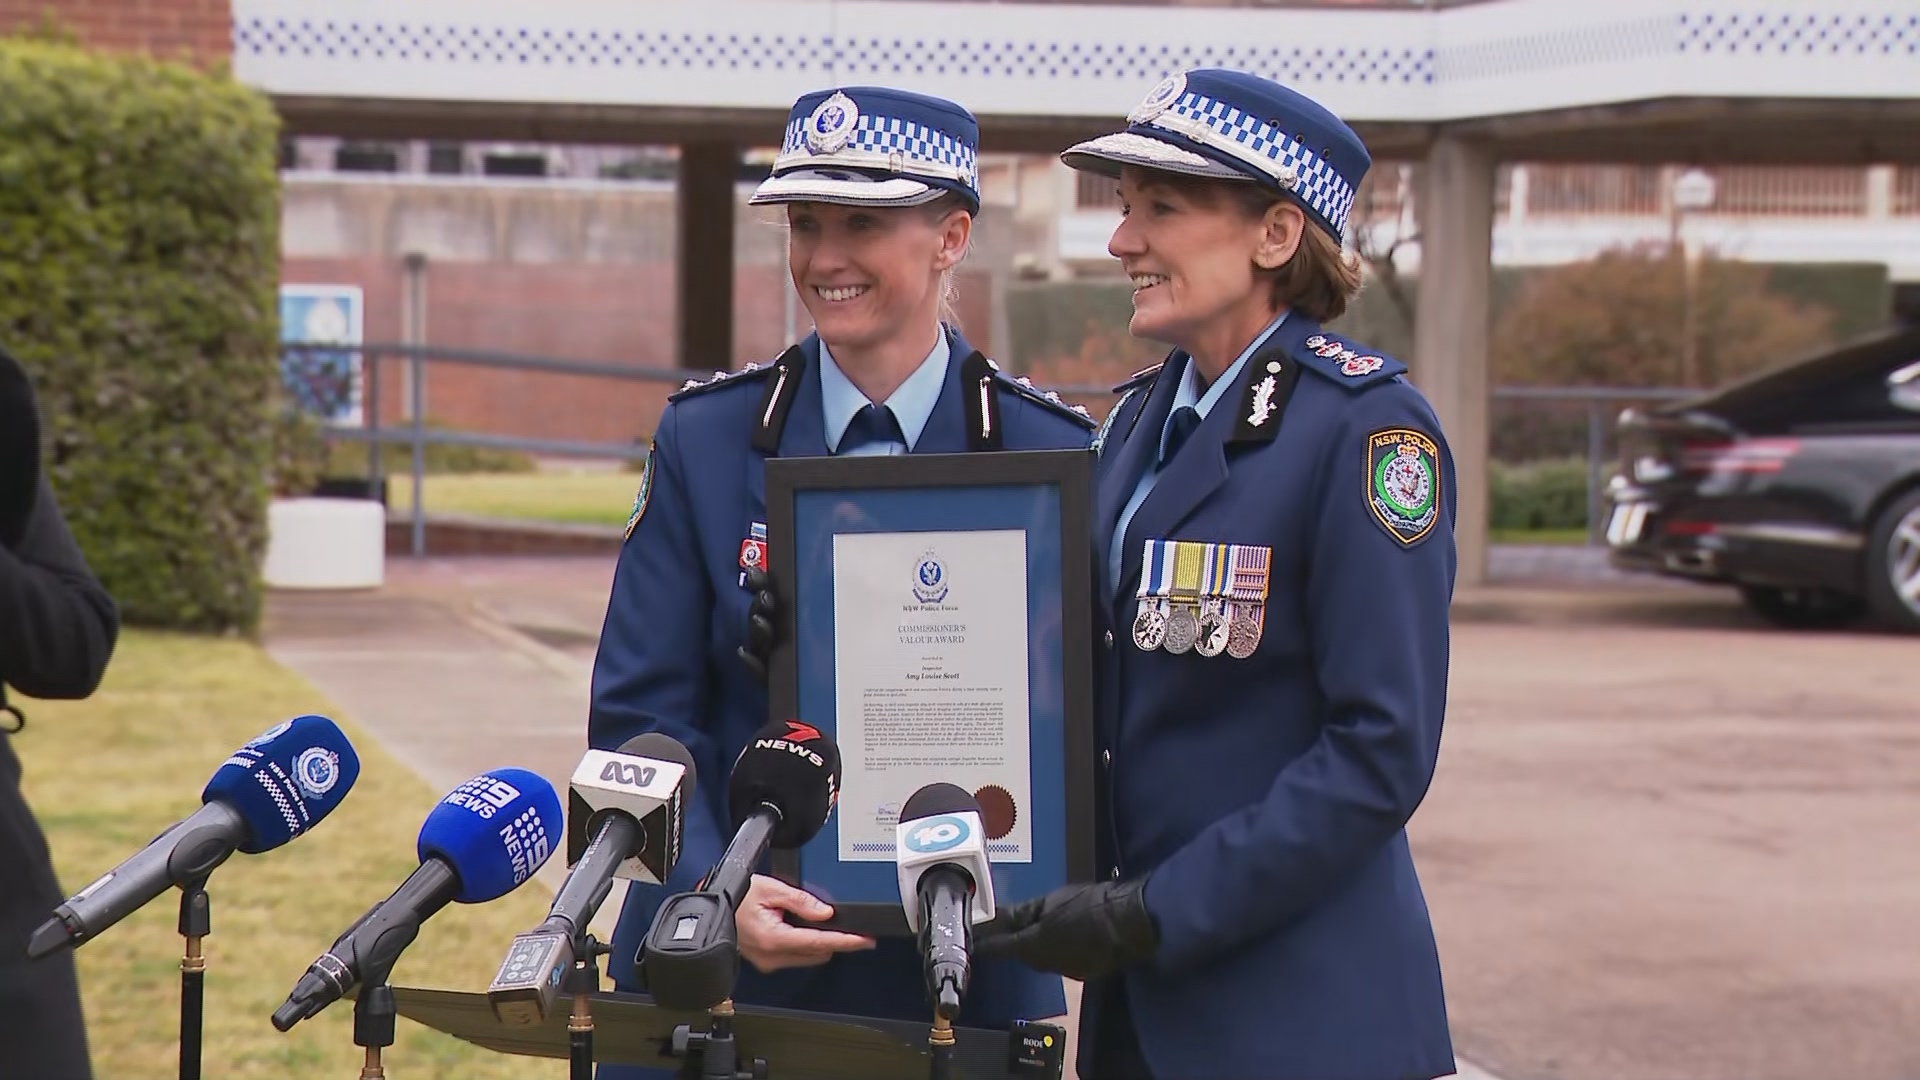 Inspector Amy Scott receives the Commissioners Valour Award during a ceremony at the NSW Police Academy in Goulburn